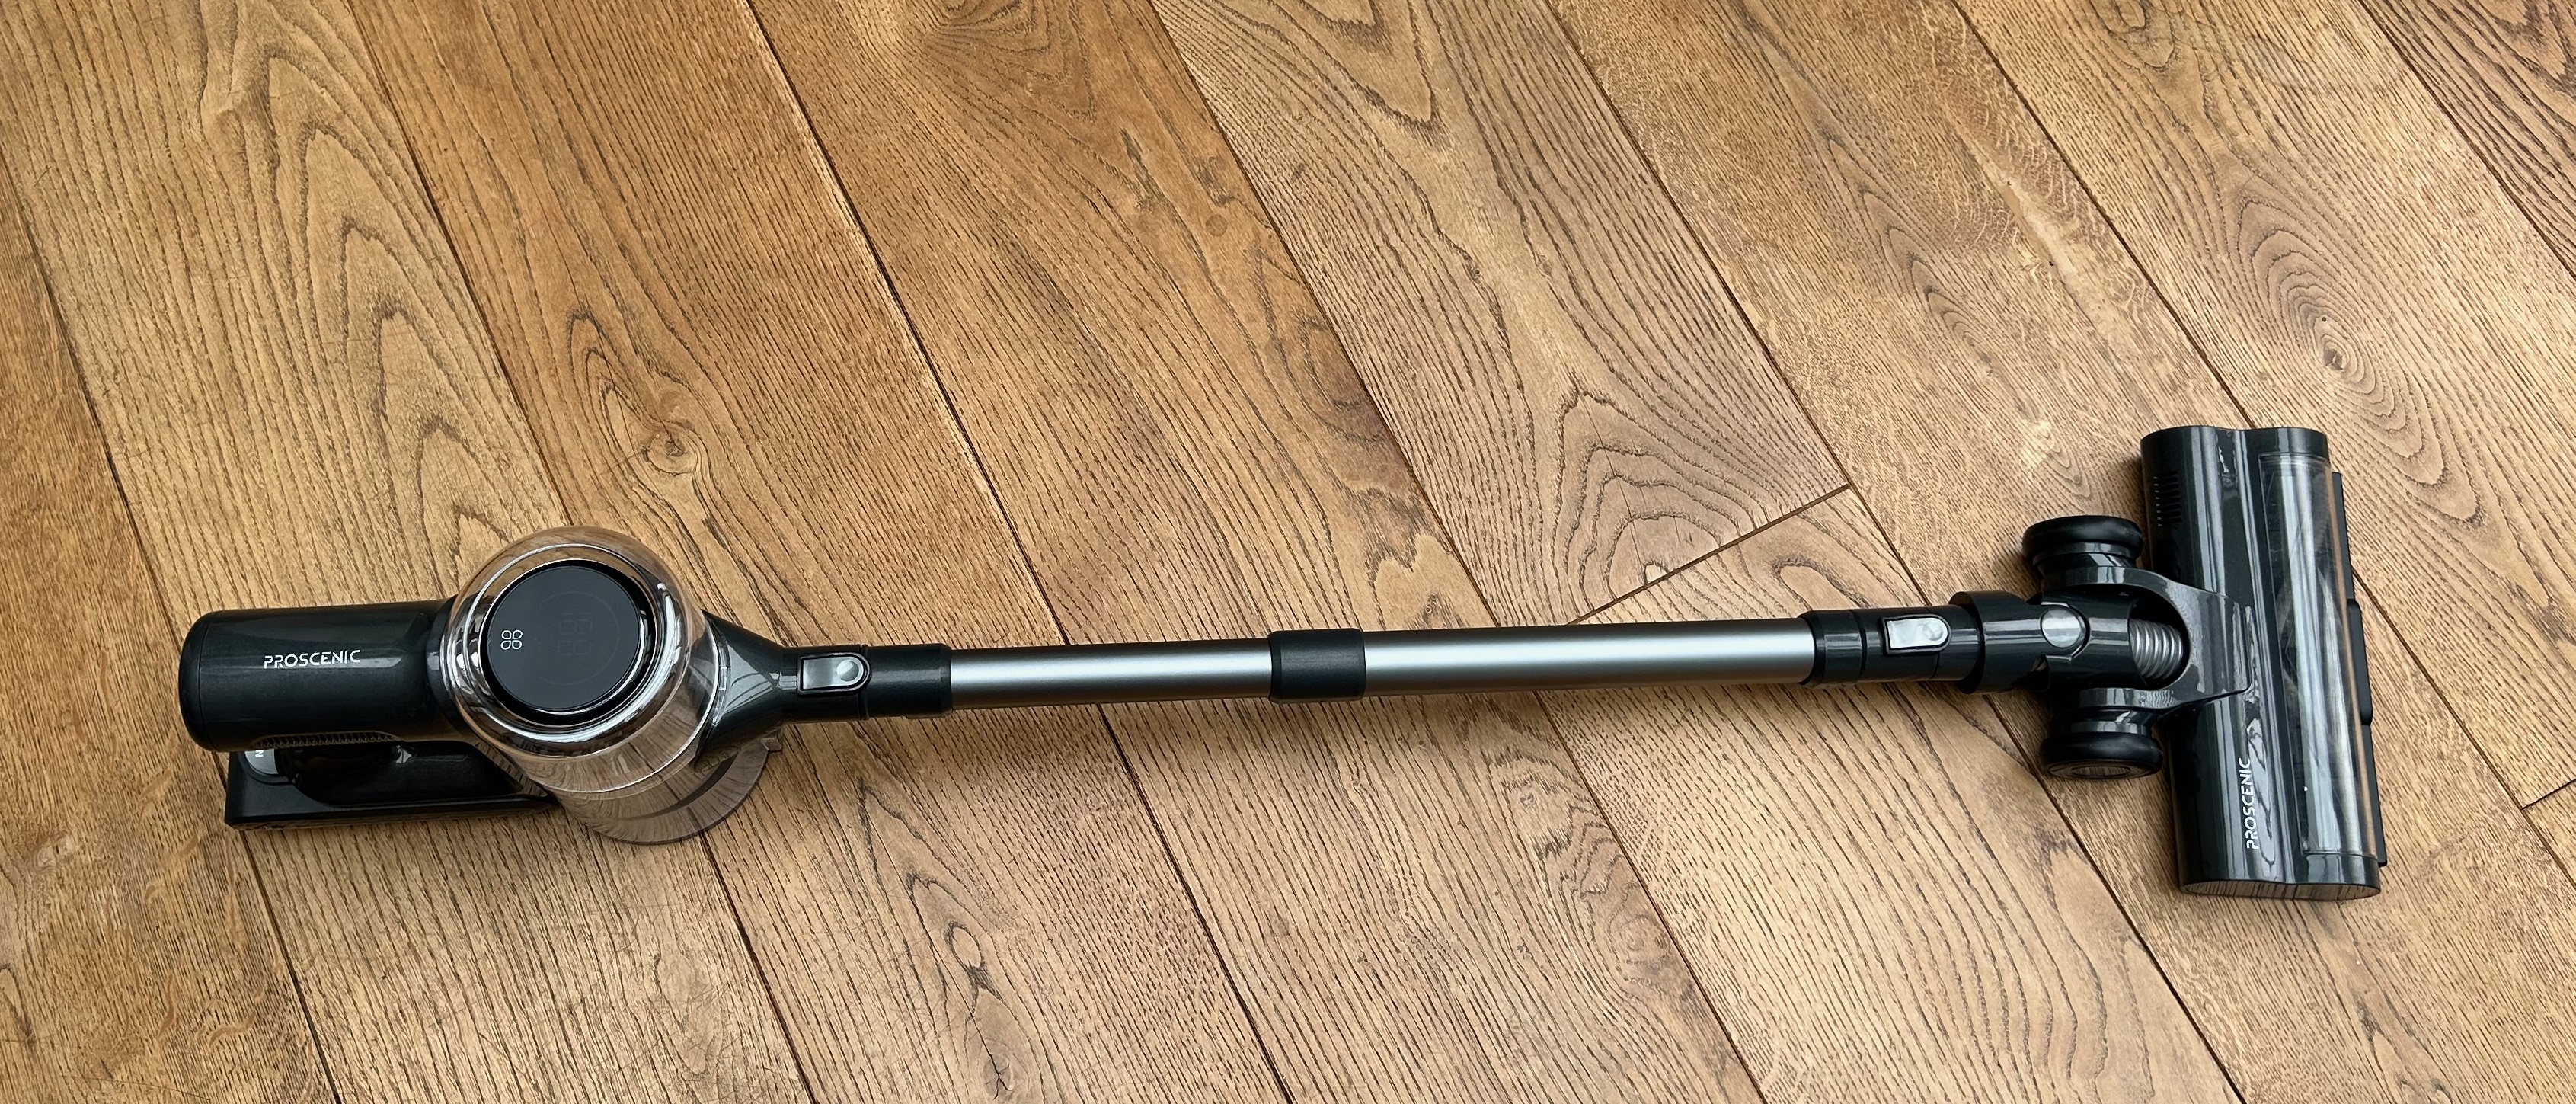 Proscenic P11 cordless vacuum cleaner review